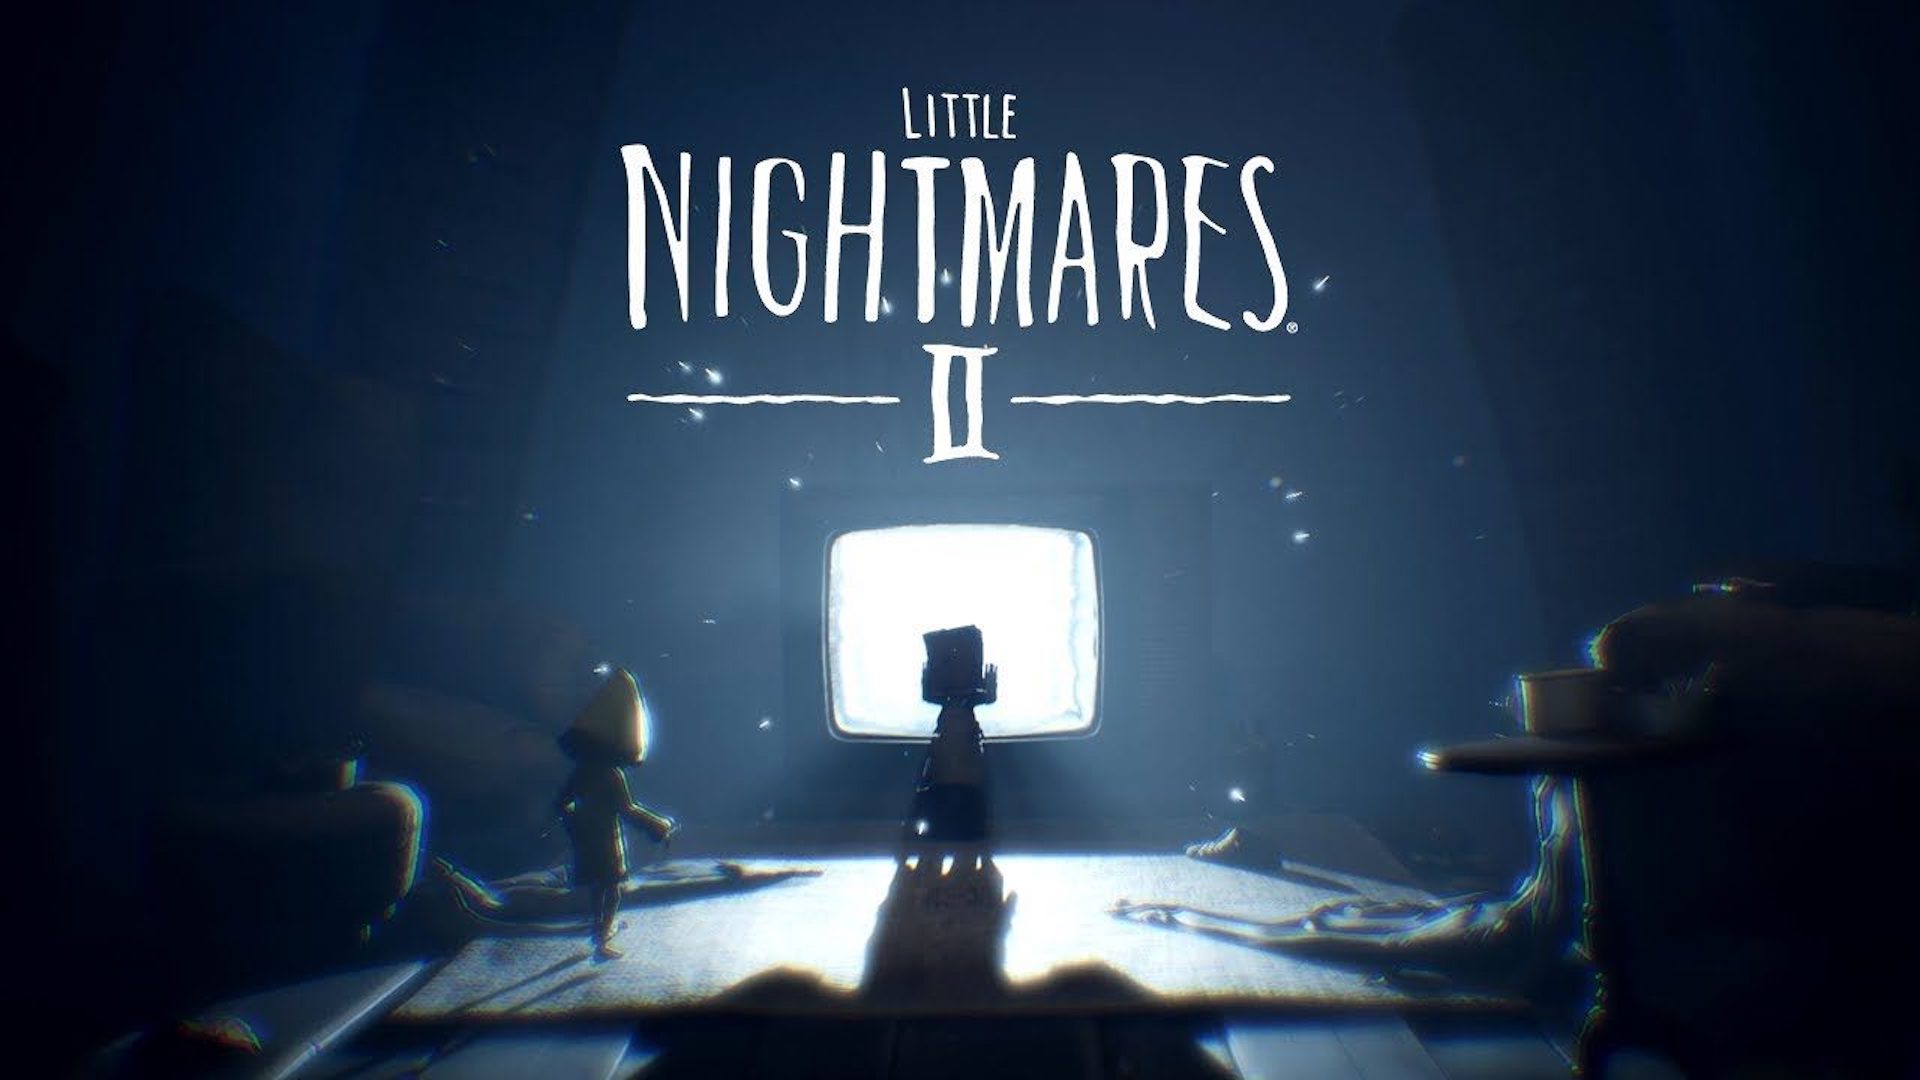 Little Nightmares 2 Out In February 2021, Creepy New Gameplay Trailer Released